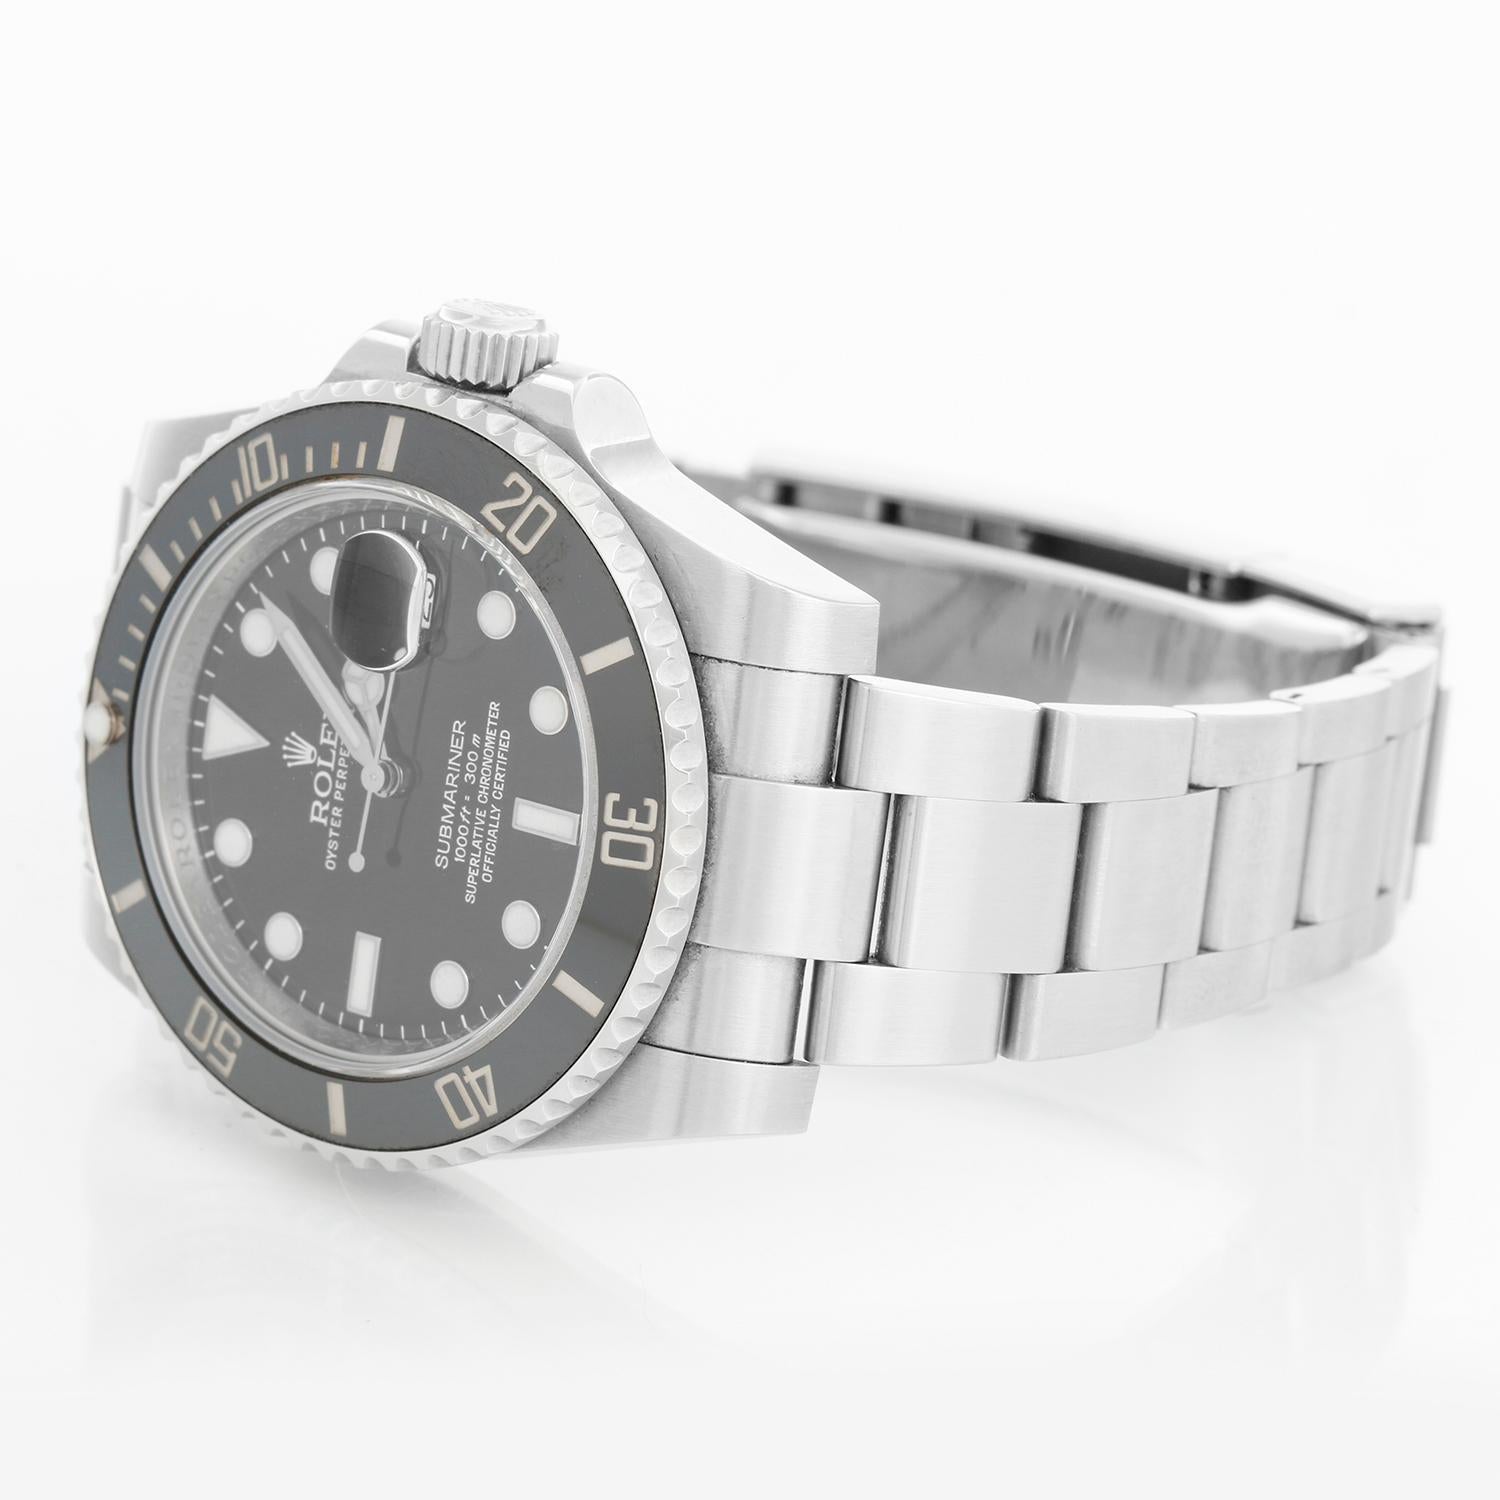 Rolex Submariner Date Men's Stainless Steel Watch 116610 LN - Automatic winding, 31 jewels, pressure proof to 1,000 feet. Stainless steel case with time-lapse Cerachrom bezel . Black dial with luminous markers; date at 3 o'clock. Stainless steel